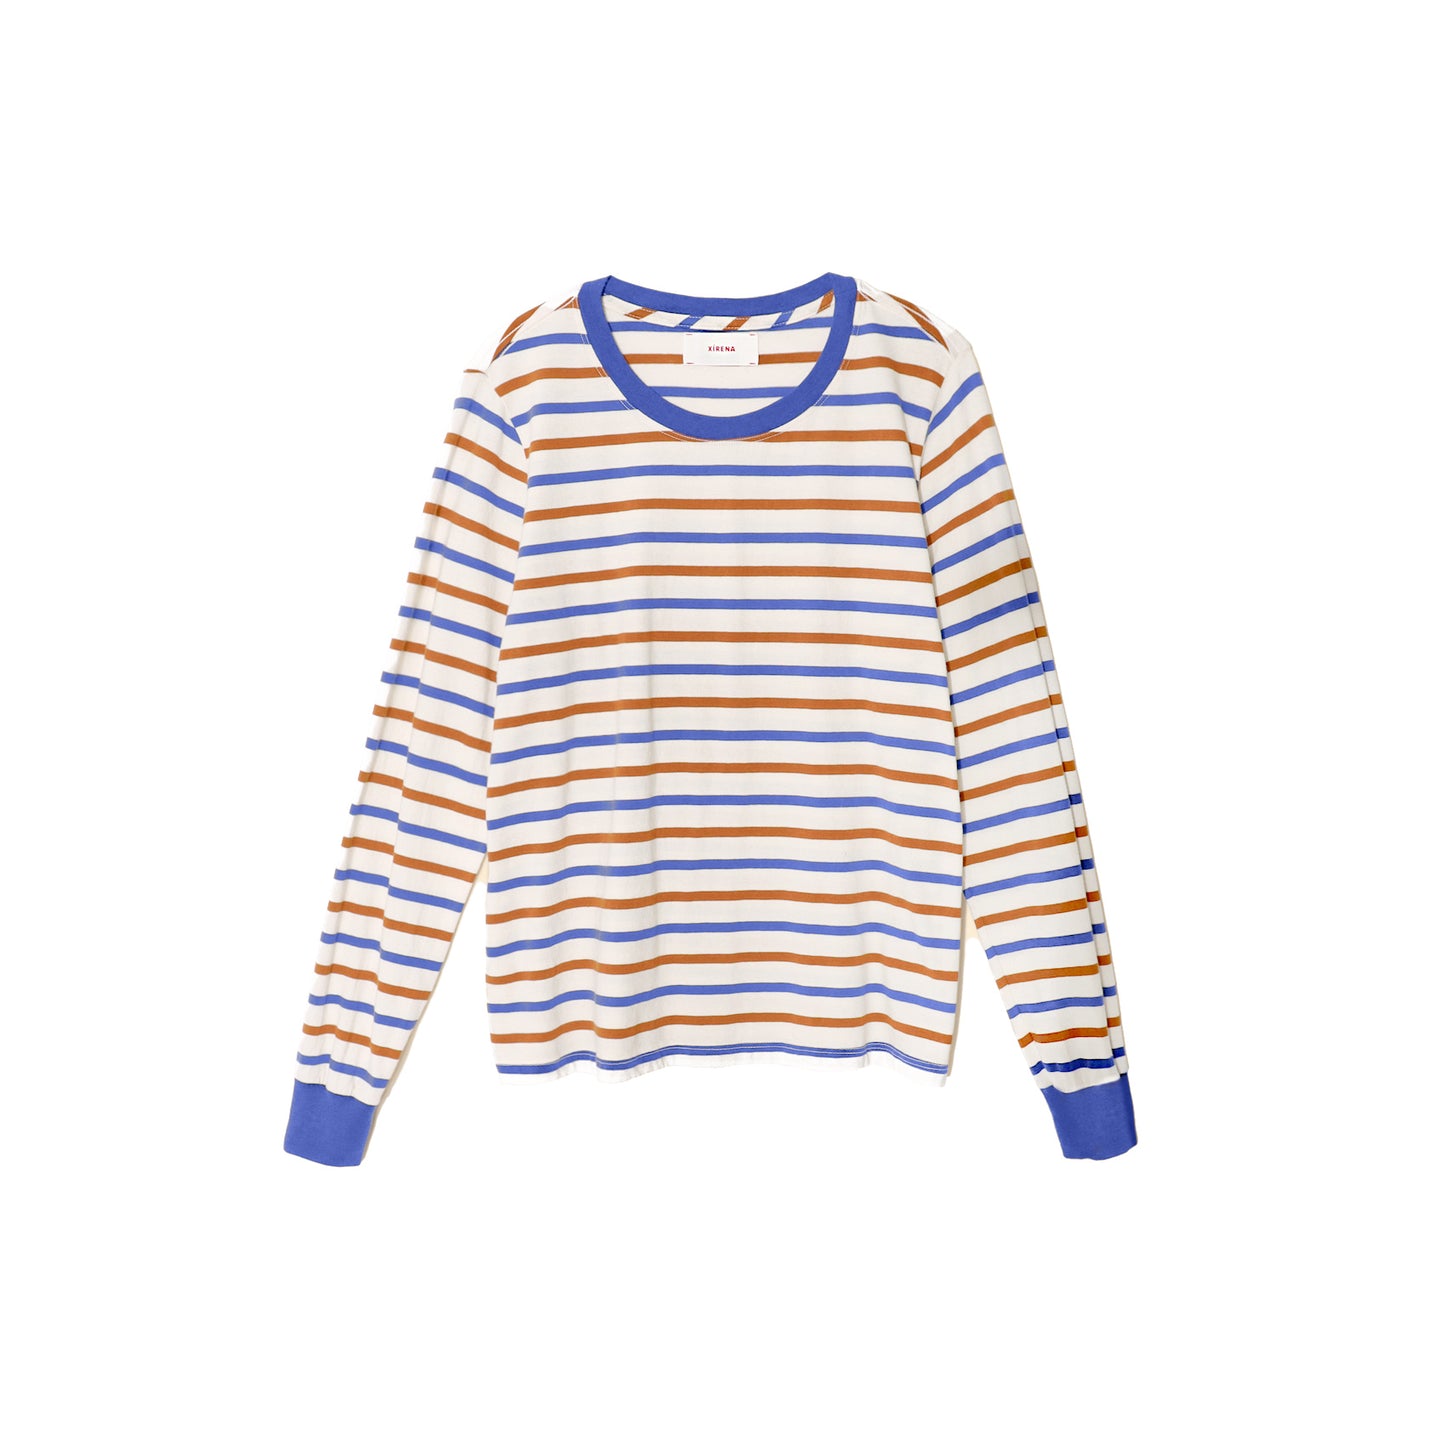 Easton Striped Tee in Royal Spice